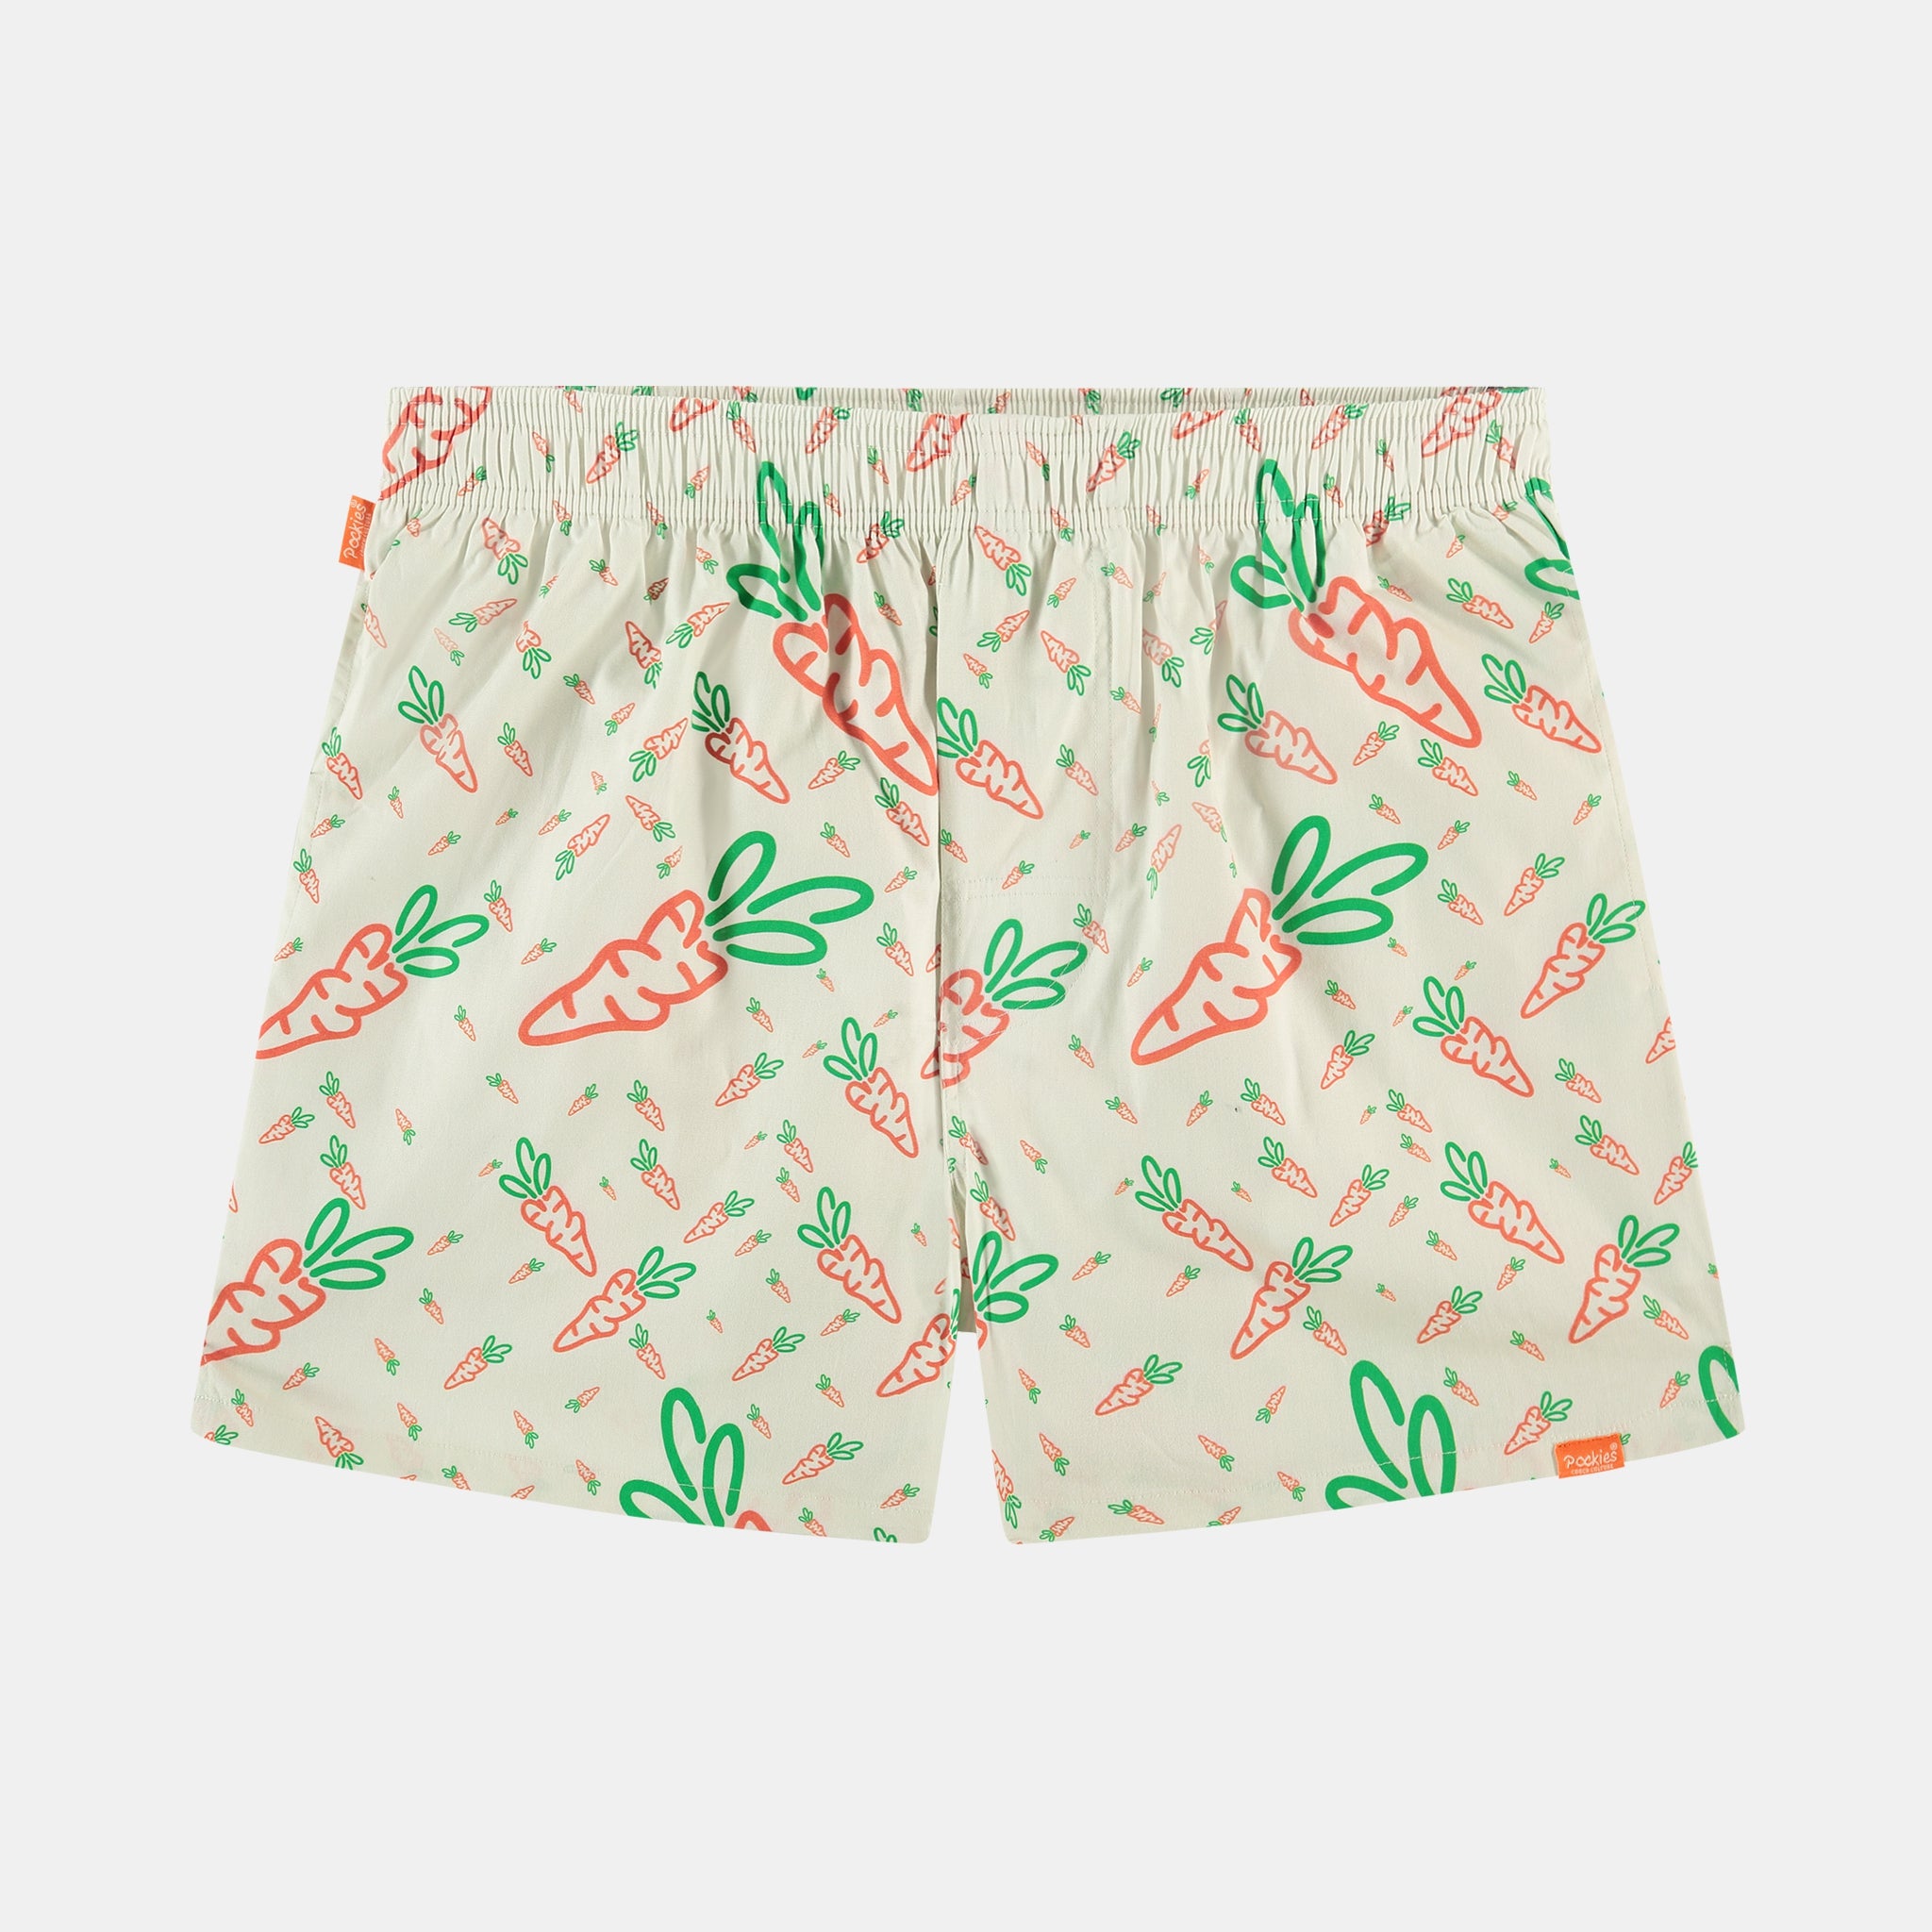 Carrots by Pockies Cream Boxers